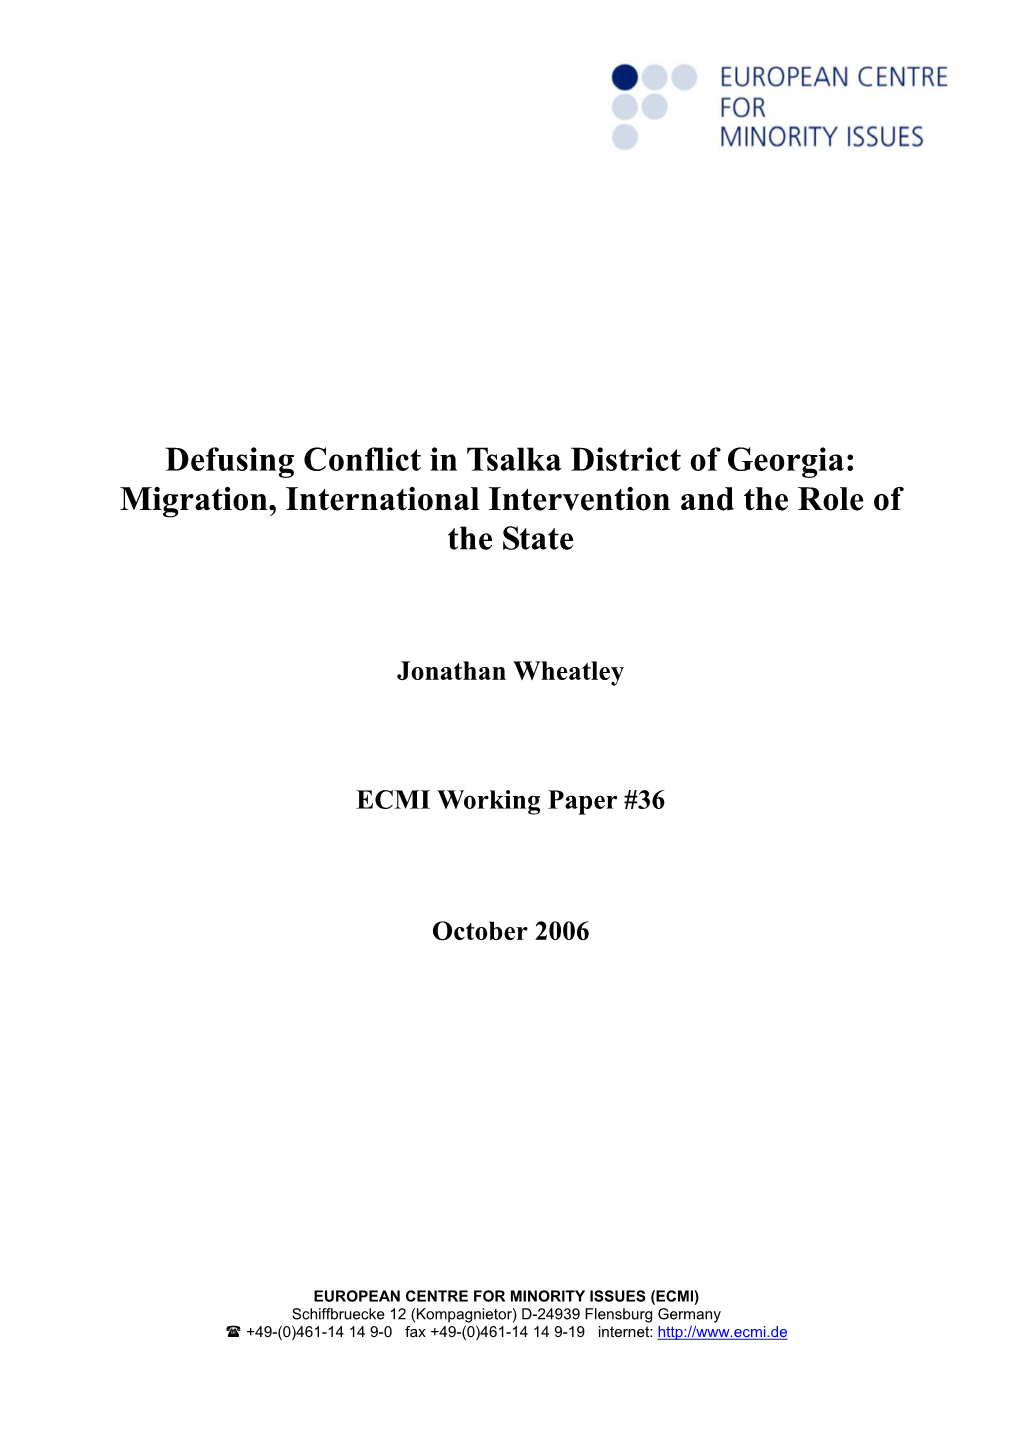 Defusing Conflict in Tsalka District of Georgia: Migration, International Intervention and the Role of the State